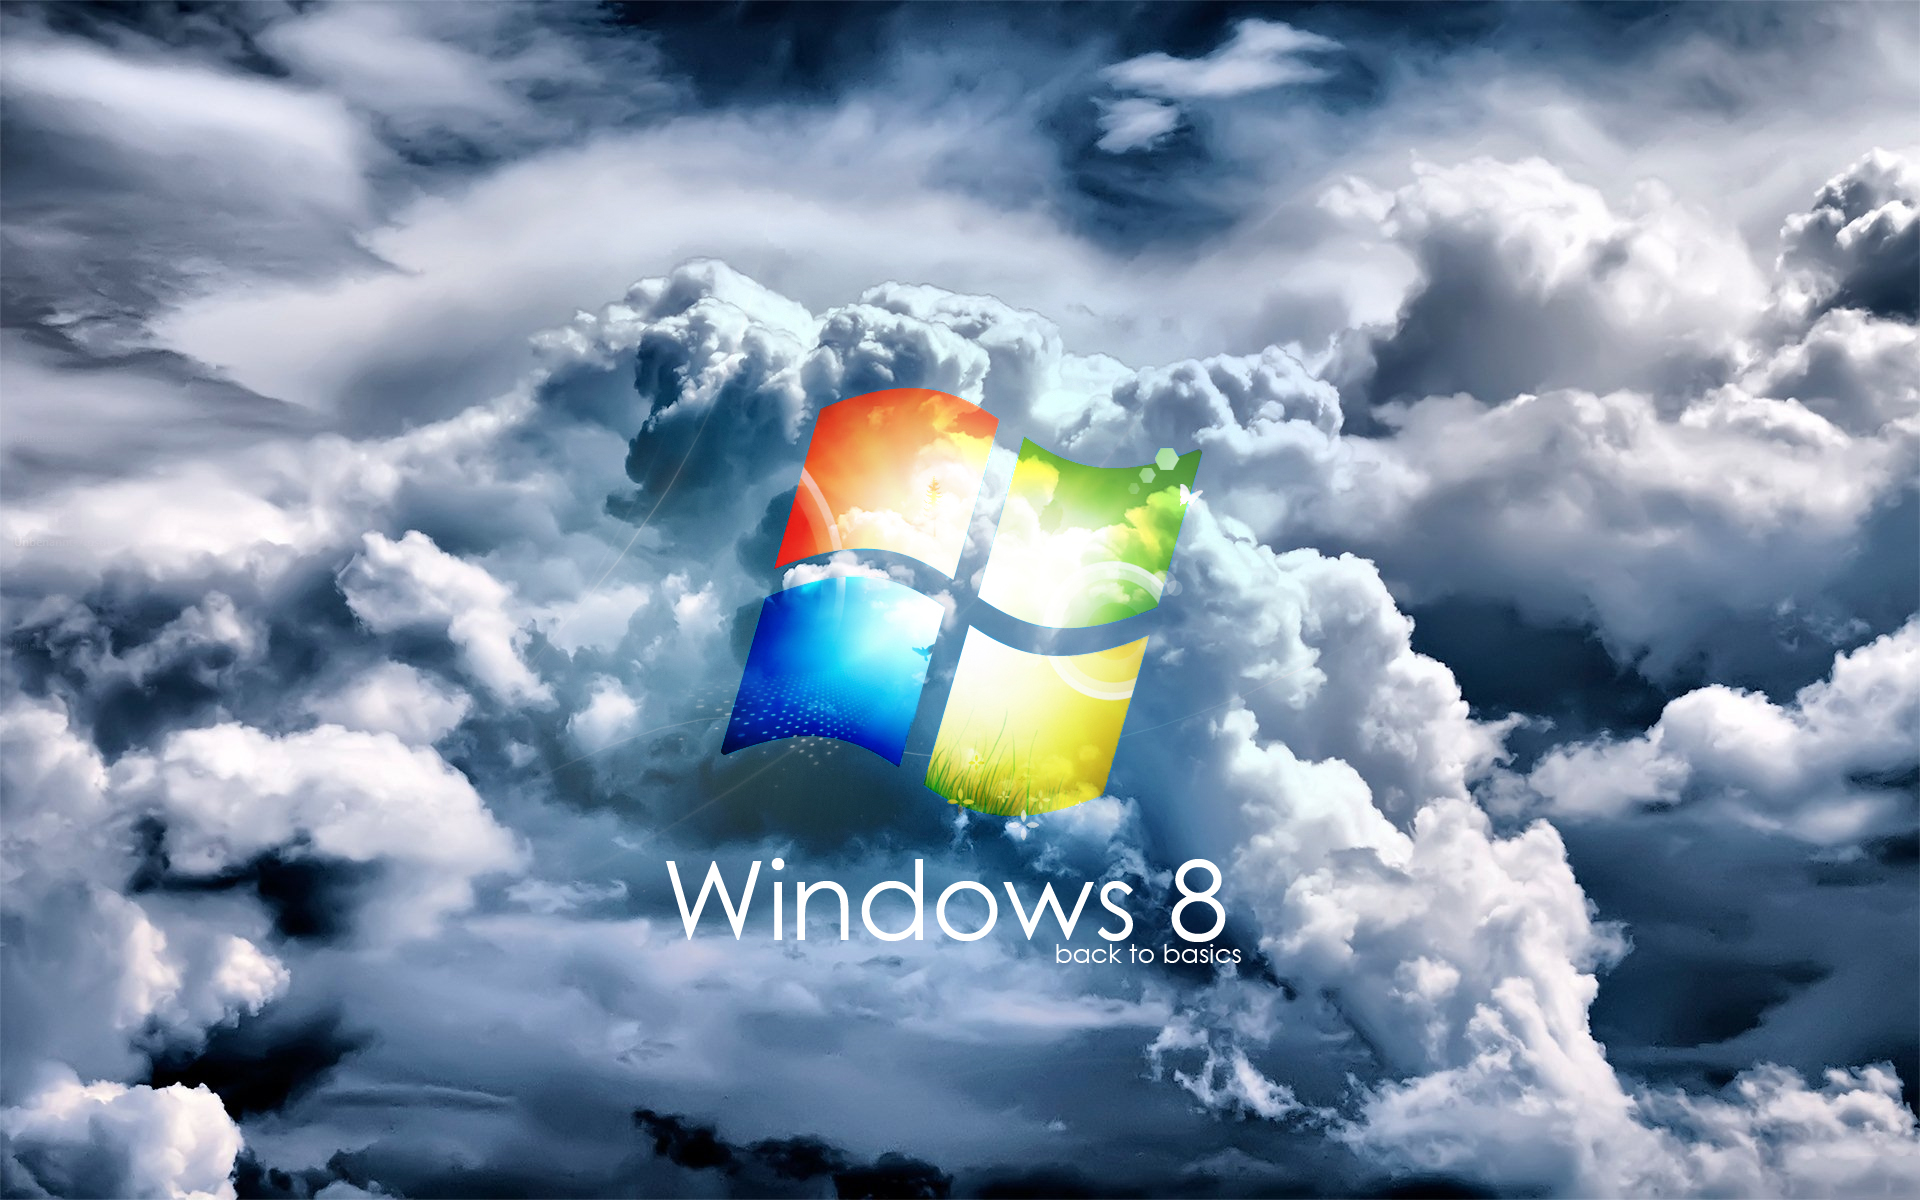 Download Microsoft Windows 8 Wallpapers Pack 3   wallpapers   TechMynd